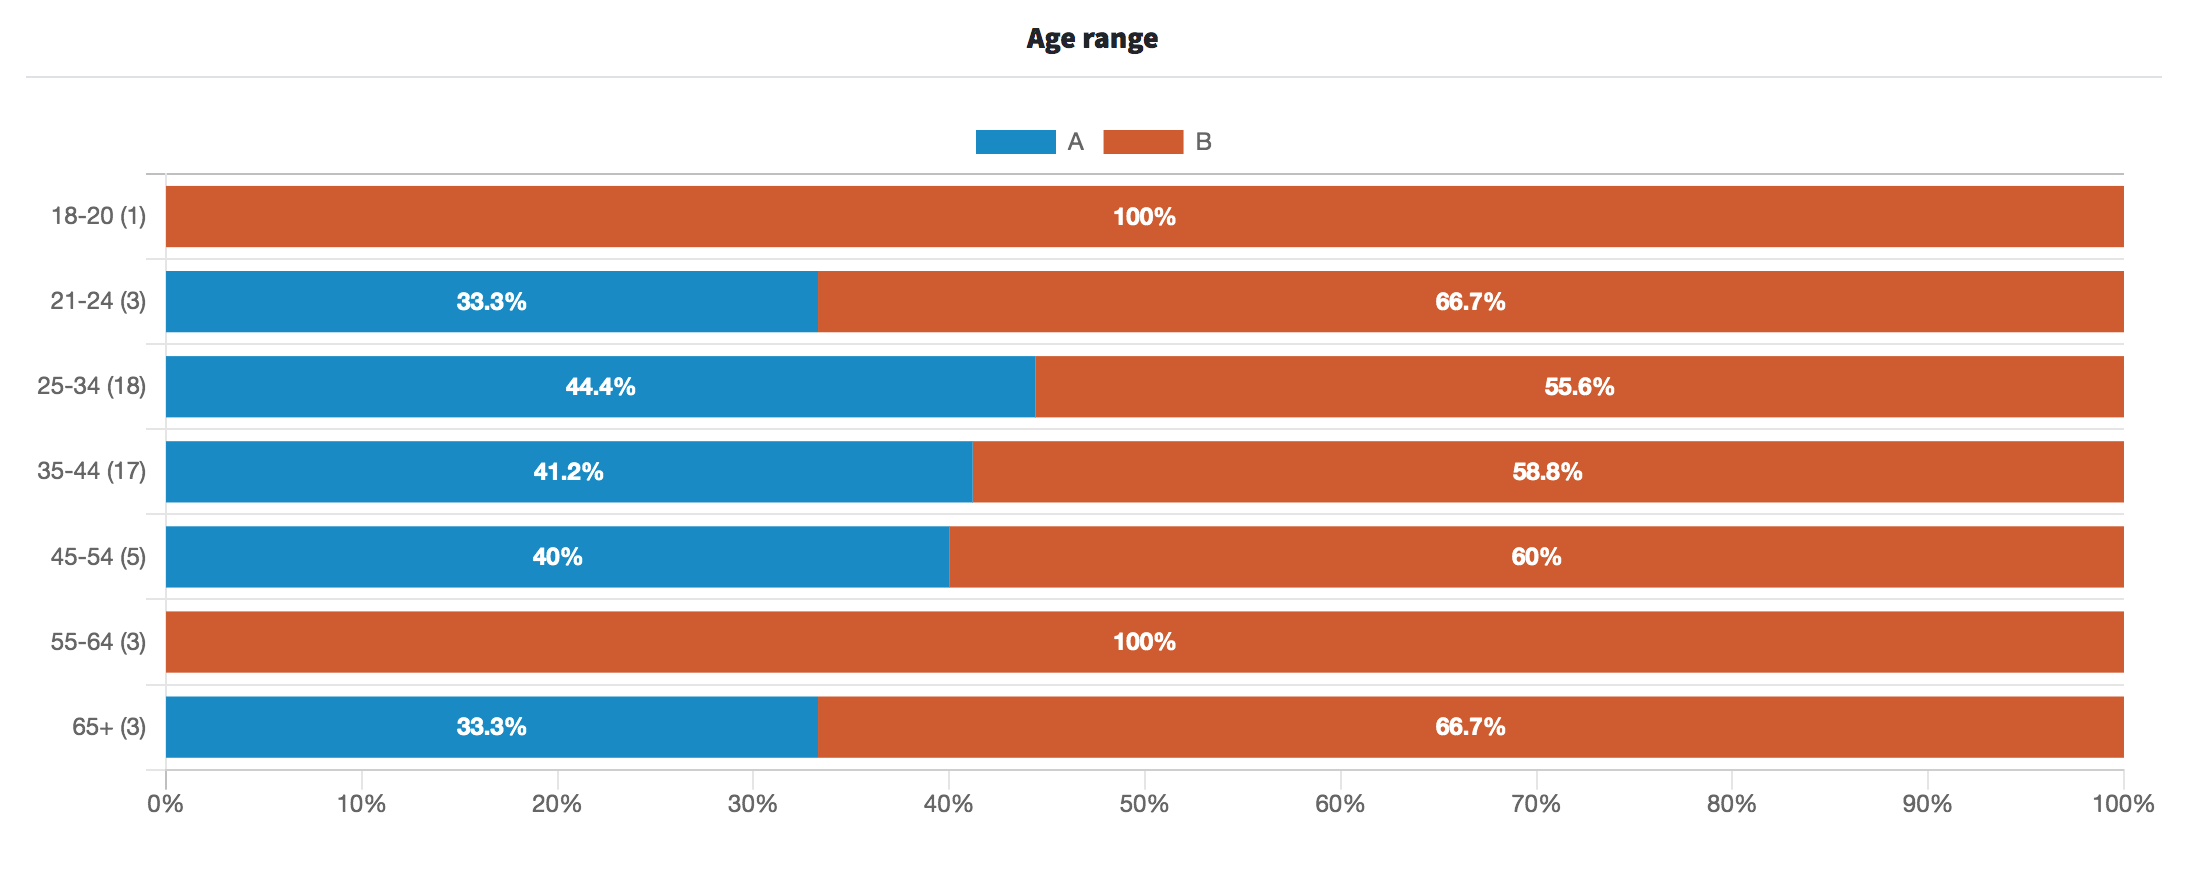 Results filtered by age group for logo test